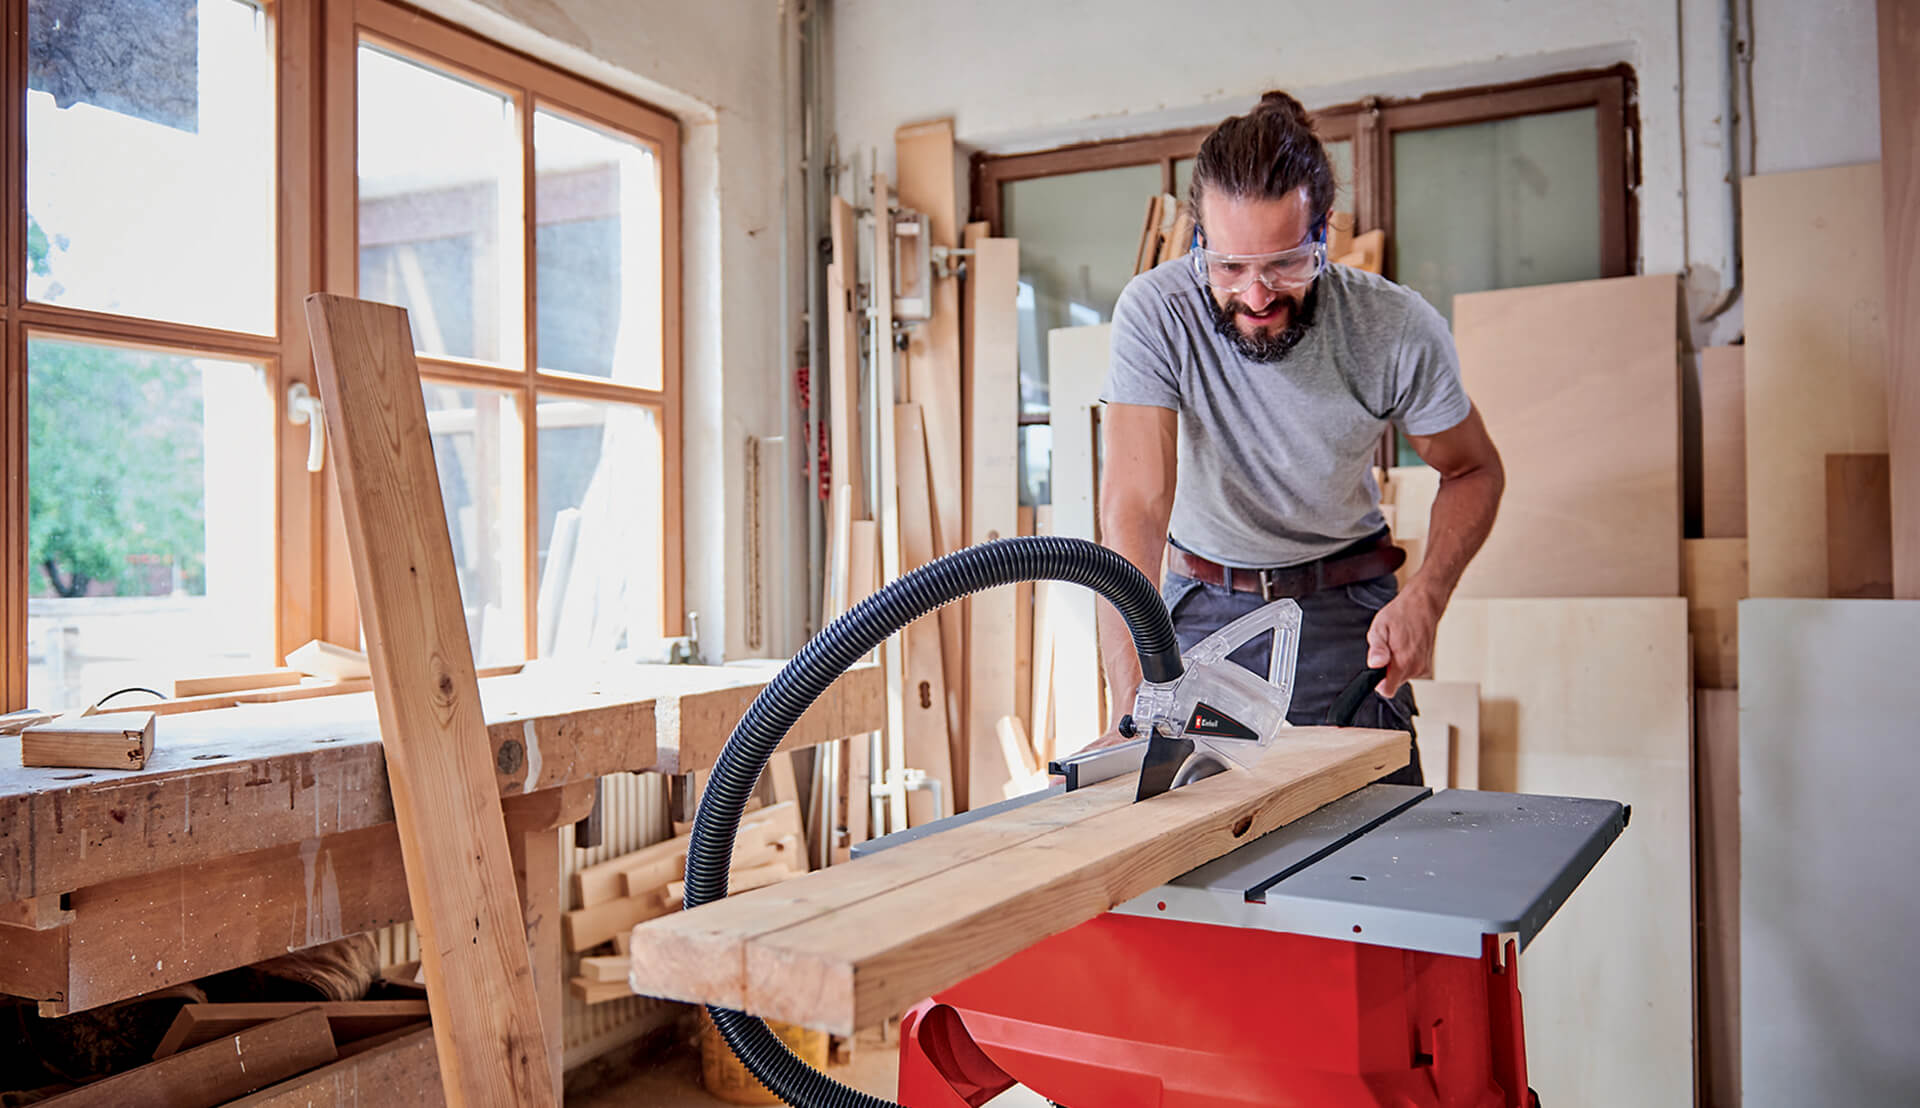 https://www.einhell.fr/fileadmin/corporate-media/blog/workshop/circular-table-saw-tips-and-tricks/einhell-blog-cordless-table-saw-tips-content-01.jpg